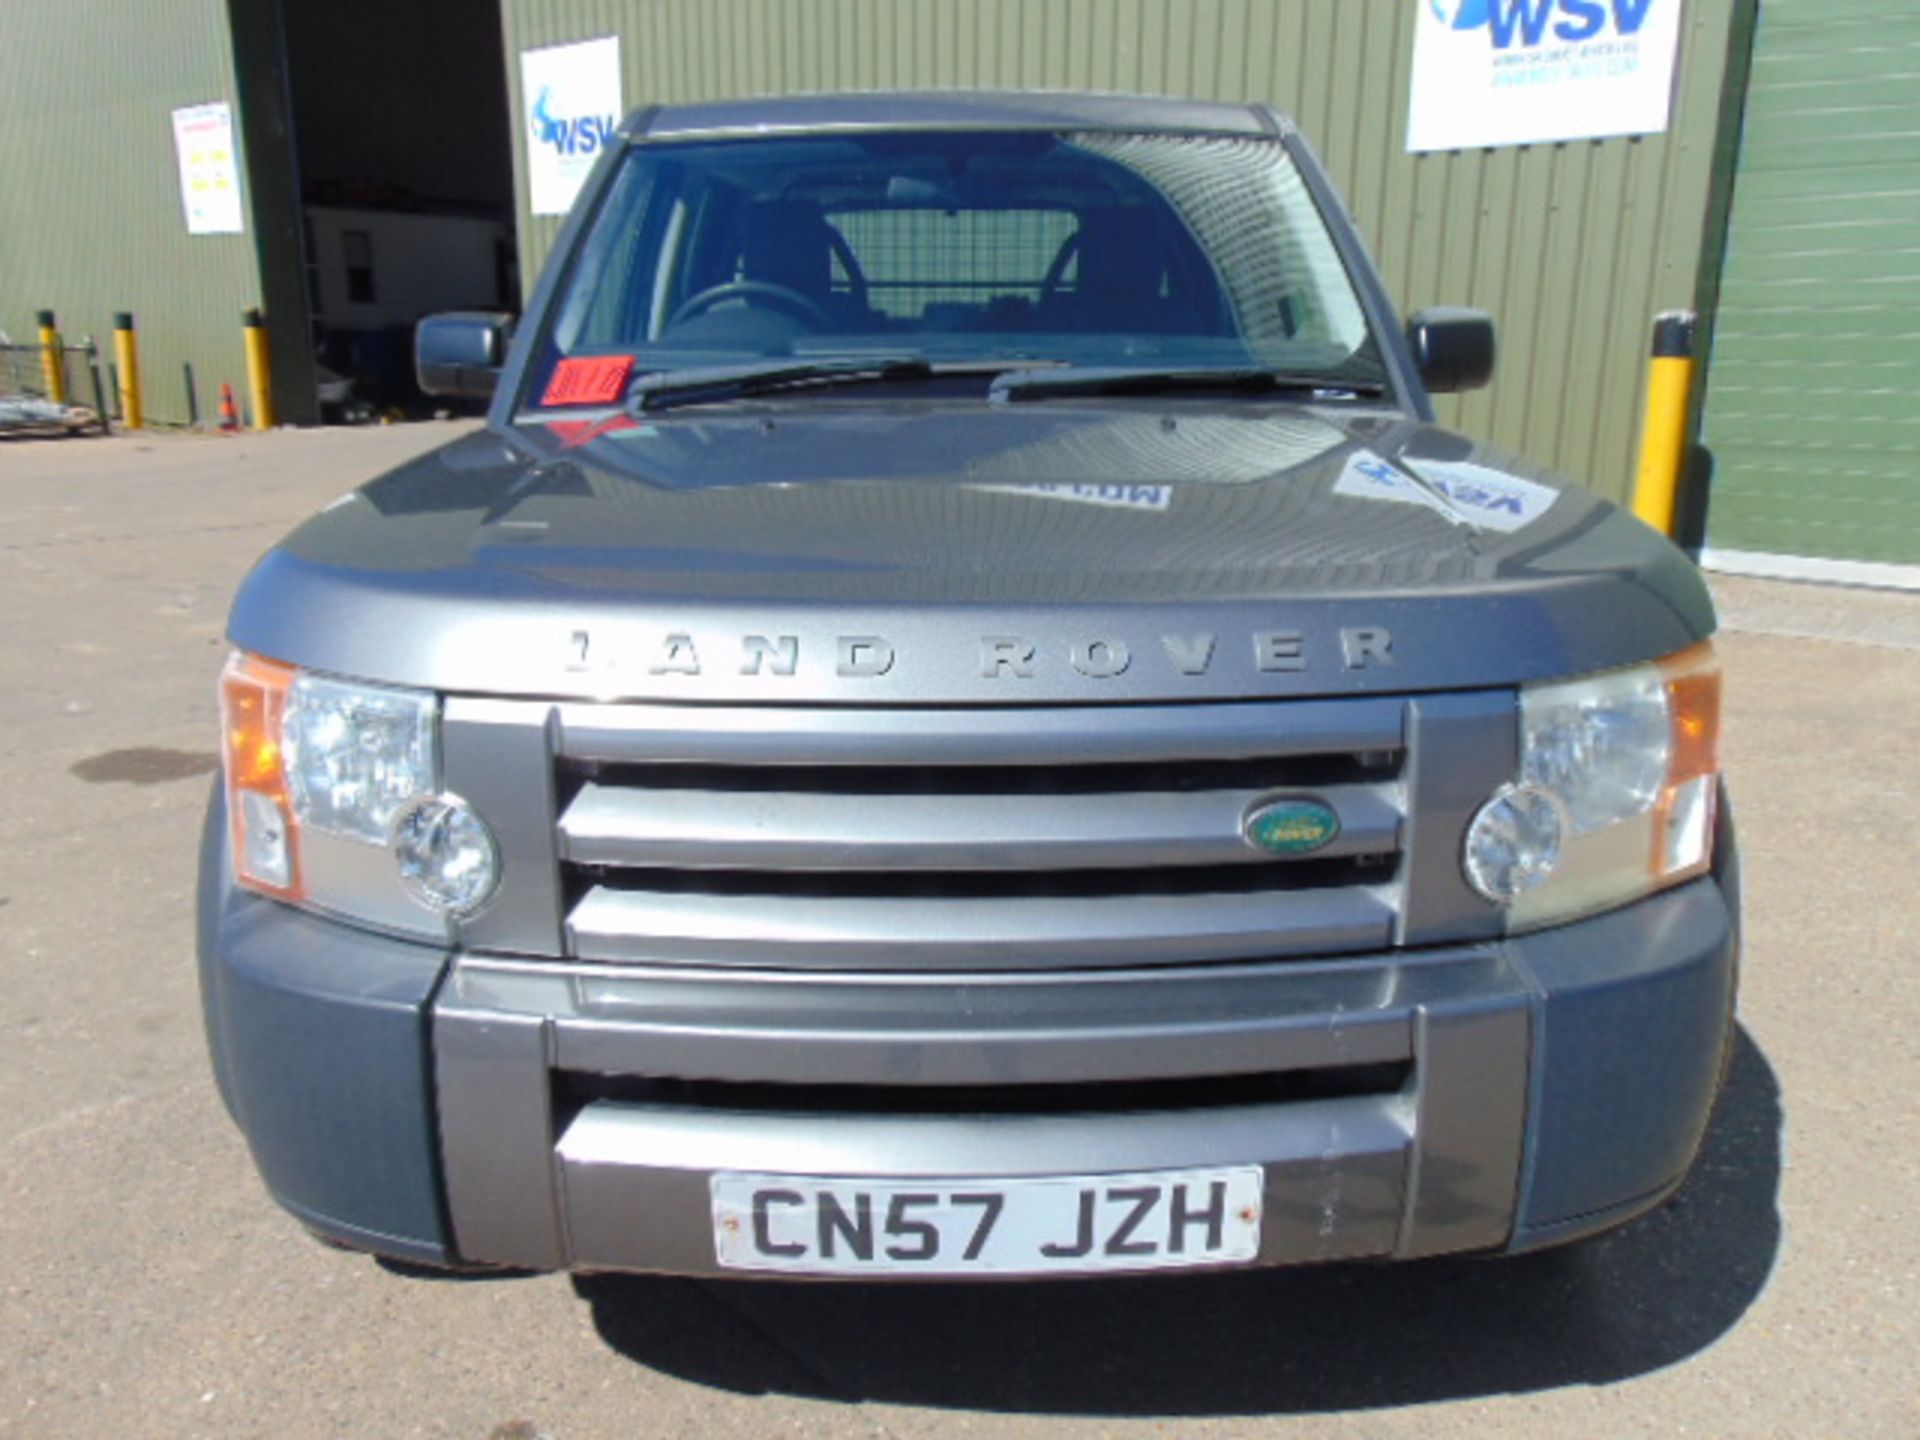 1 Owner 2007 Land Rover Discovery 3 TDV6 5d Manual ONLY 80,011 MILES! - Image 2 of 26